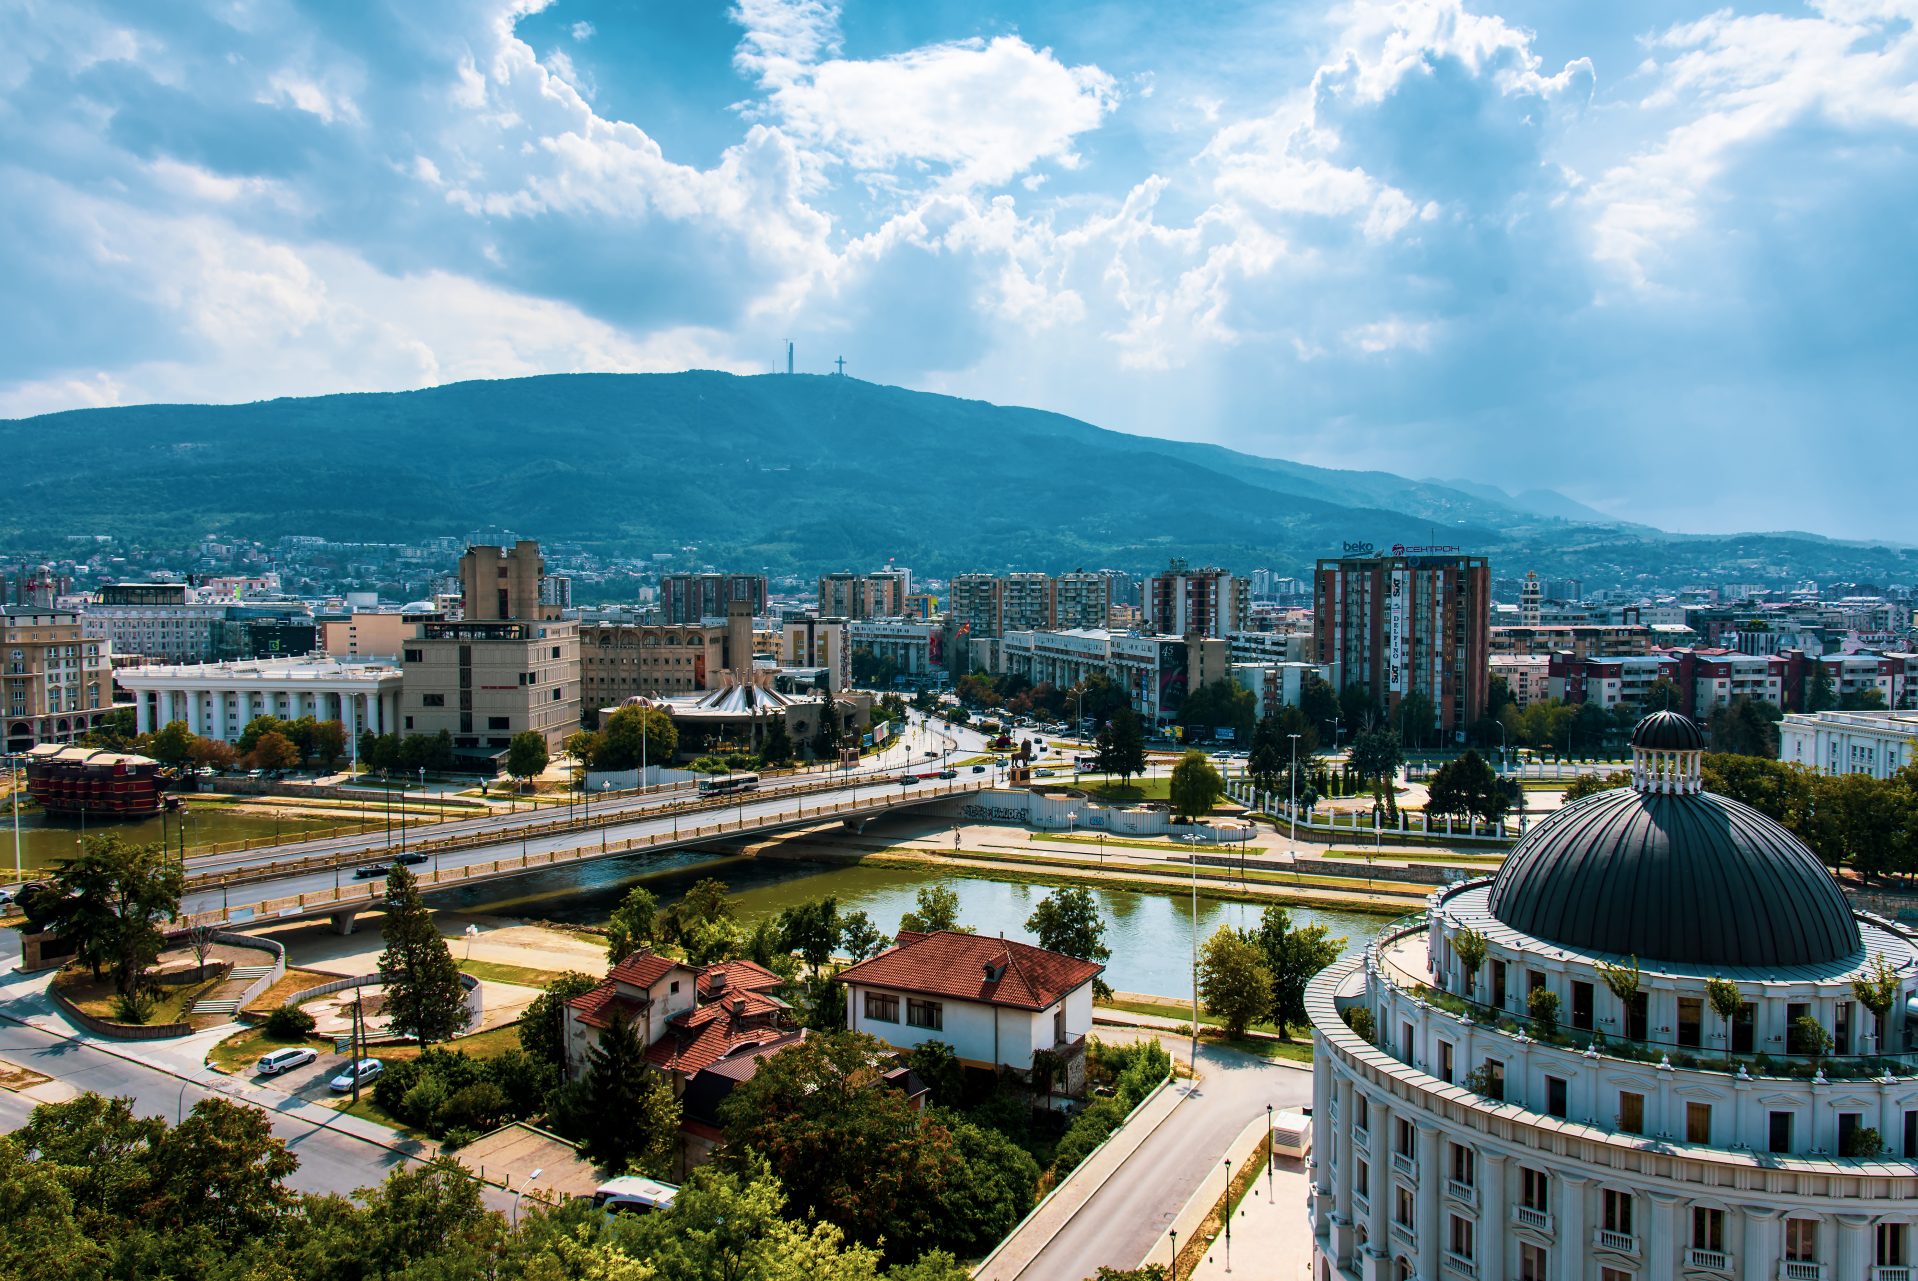 Can you move to macedonia?